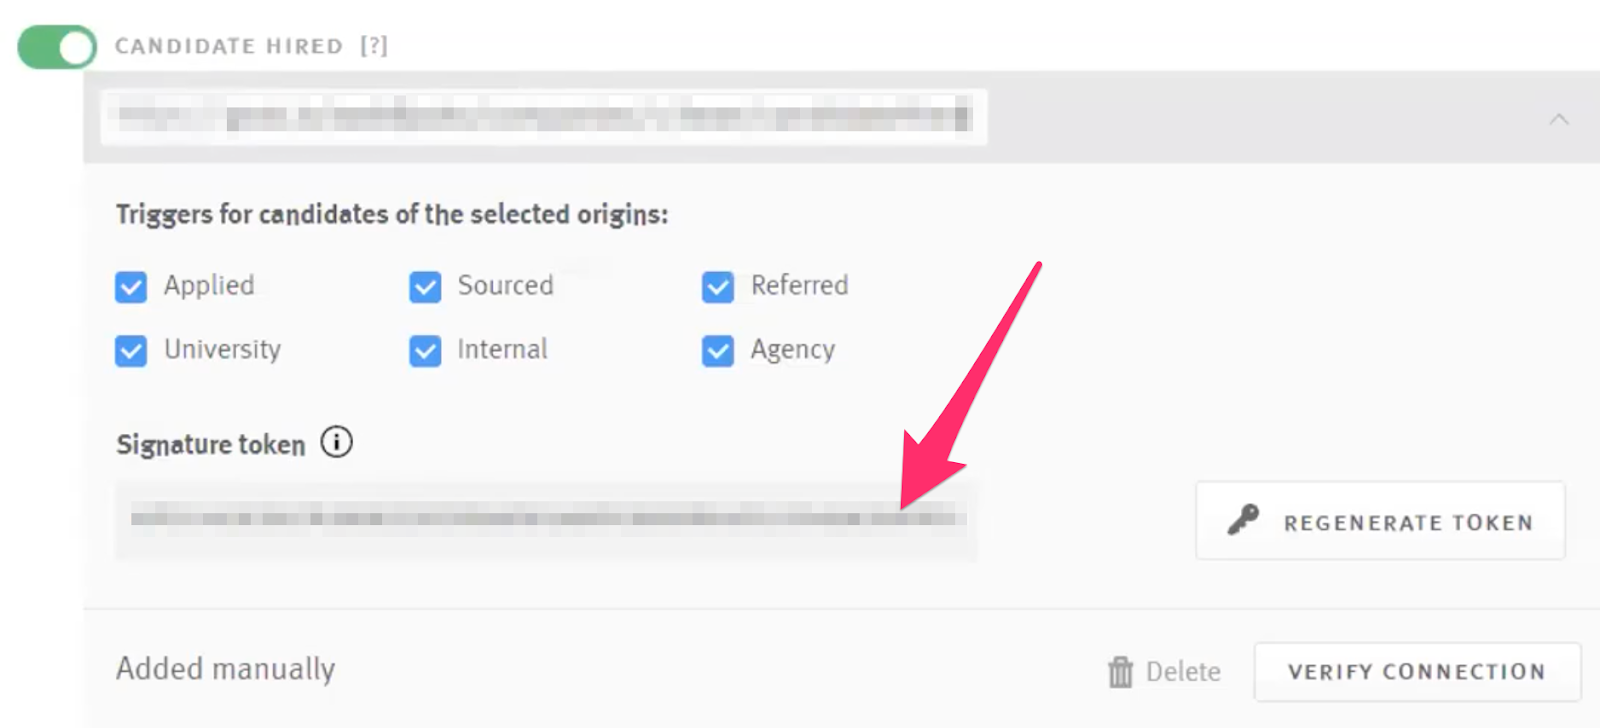 Arrow pointing to signature token field on candidate hired webhook tile in Lever